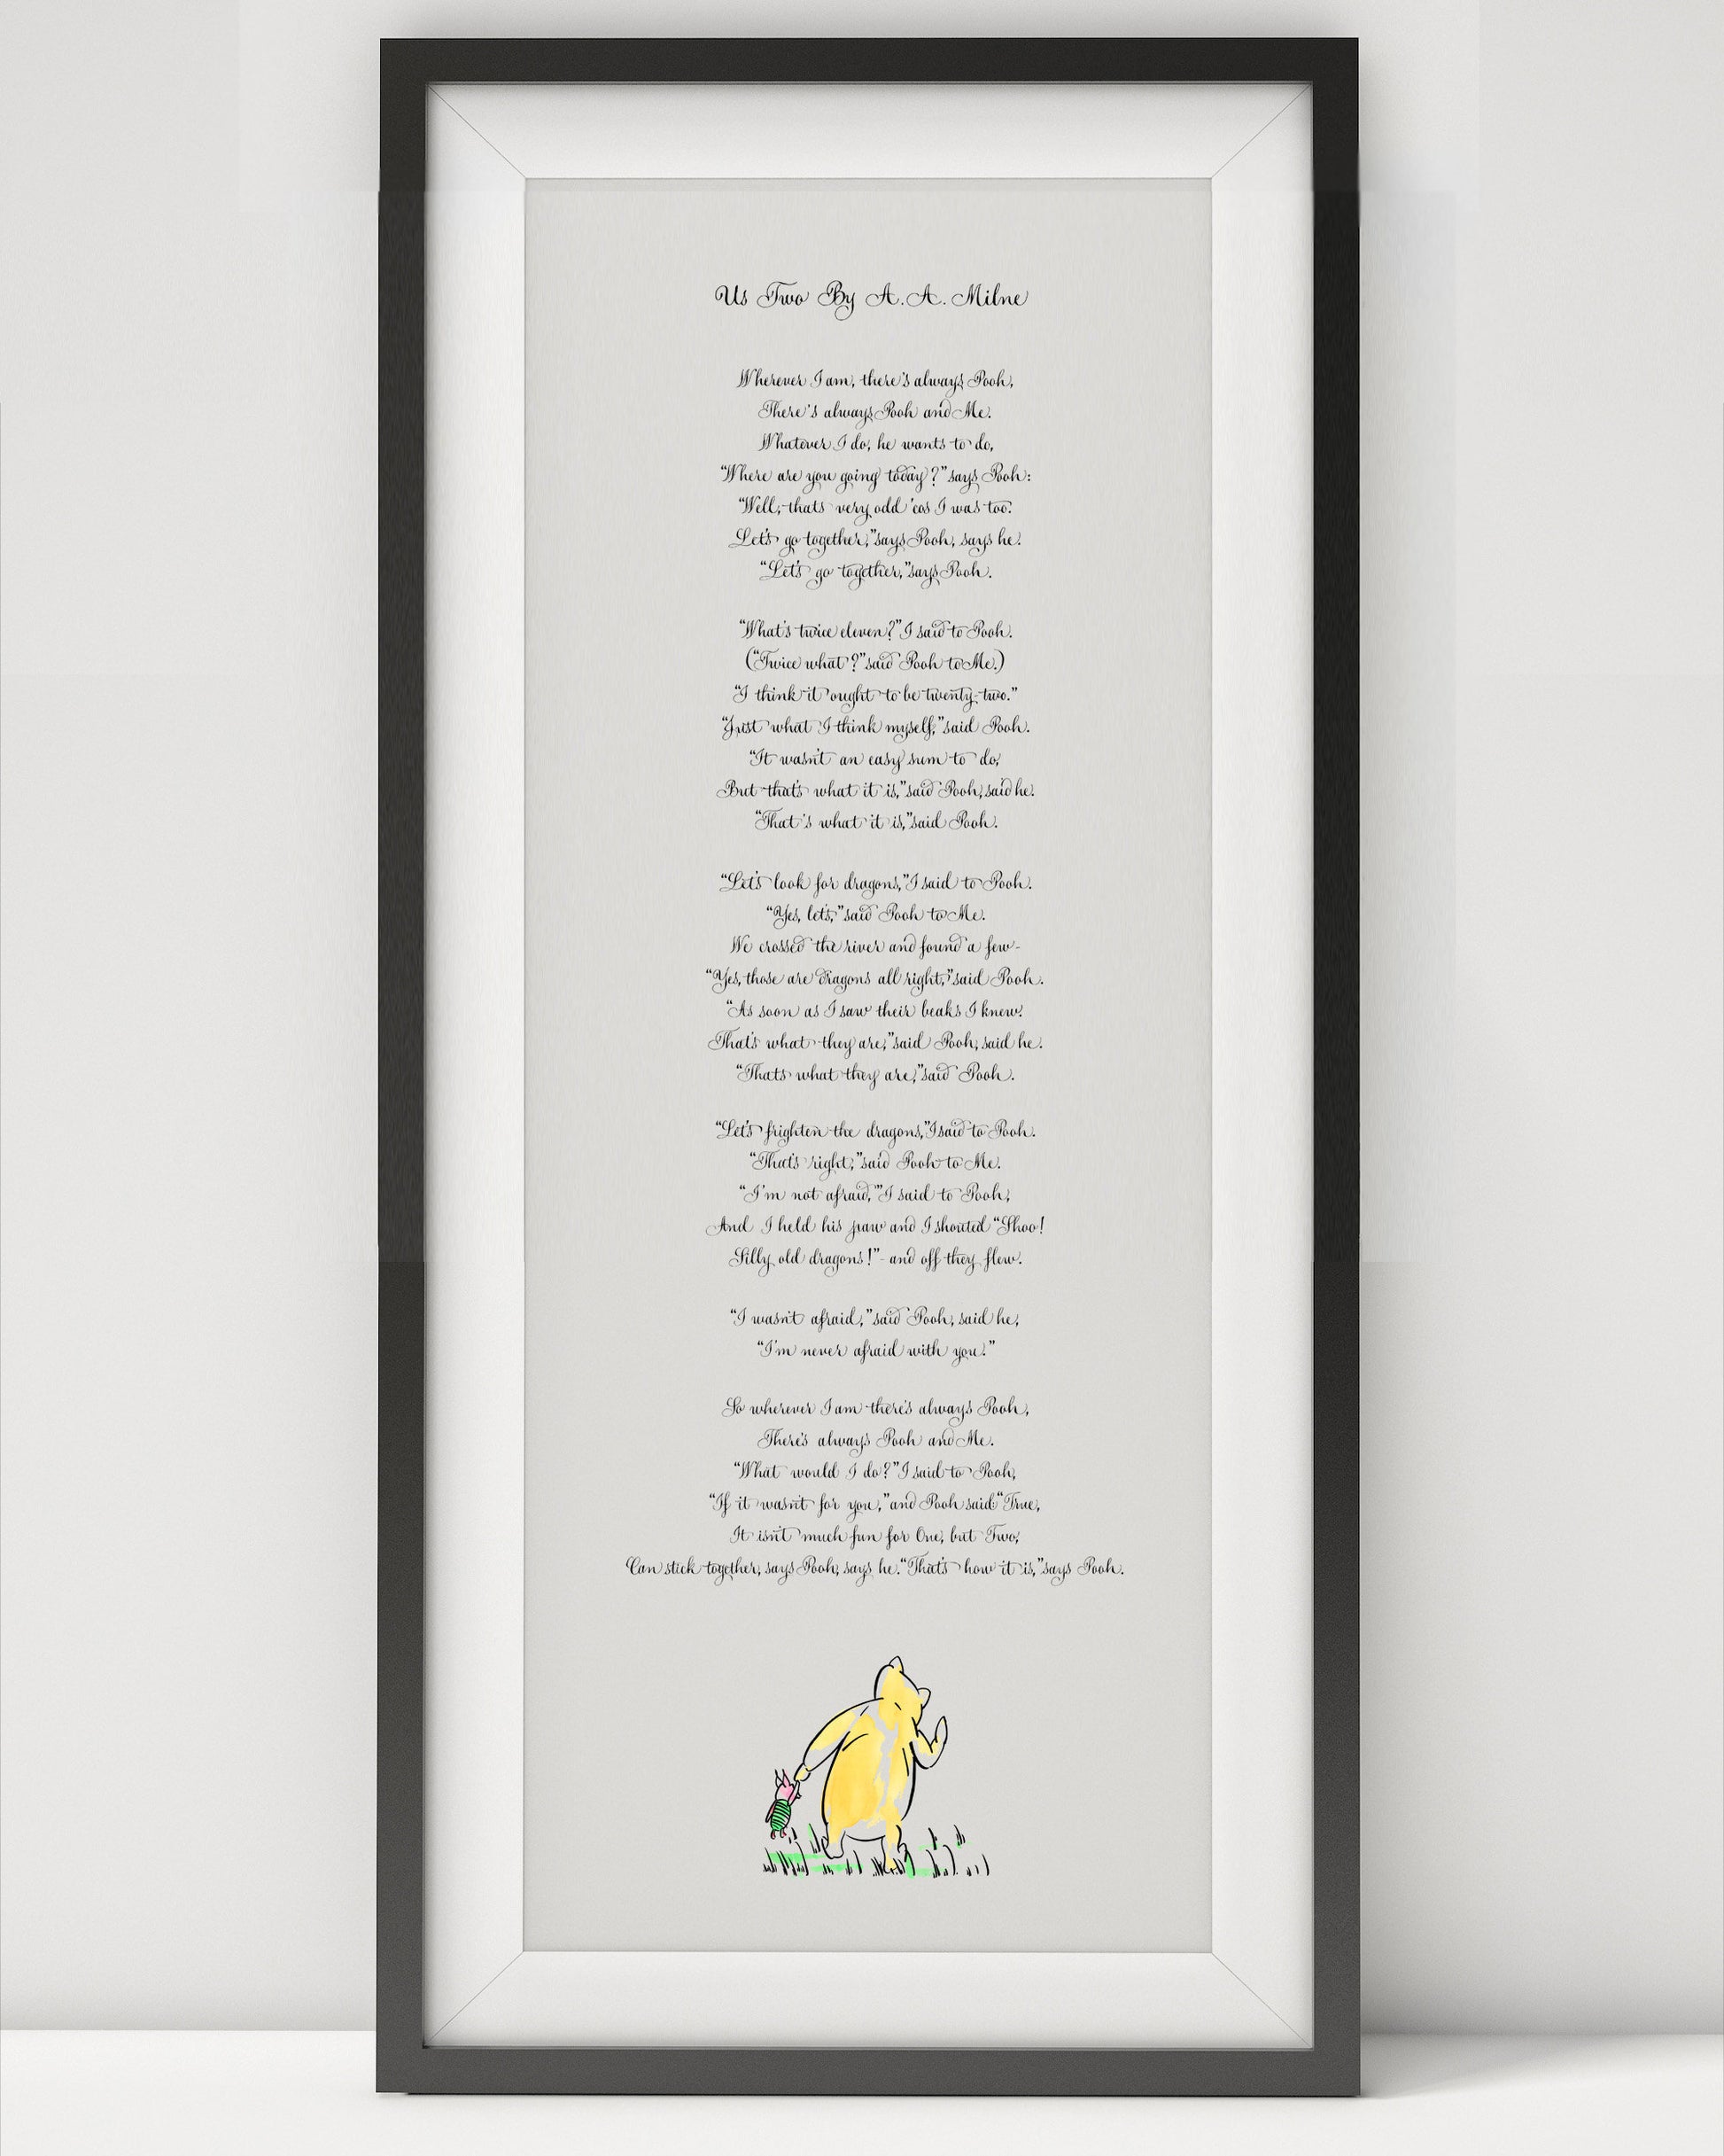 Us Two AA Milne - Winnie the Pooh Nursery Print Framed New Baby Gift, Gender Neutral Baby Gift, Neutral Baby Shower Gift, Birth Announcement